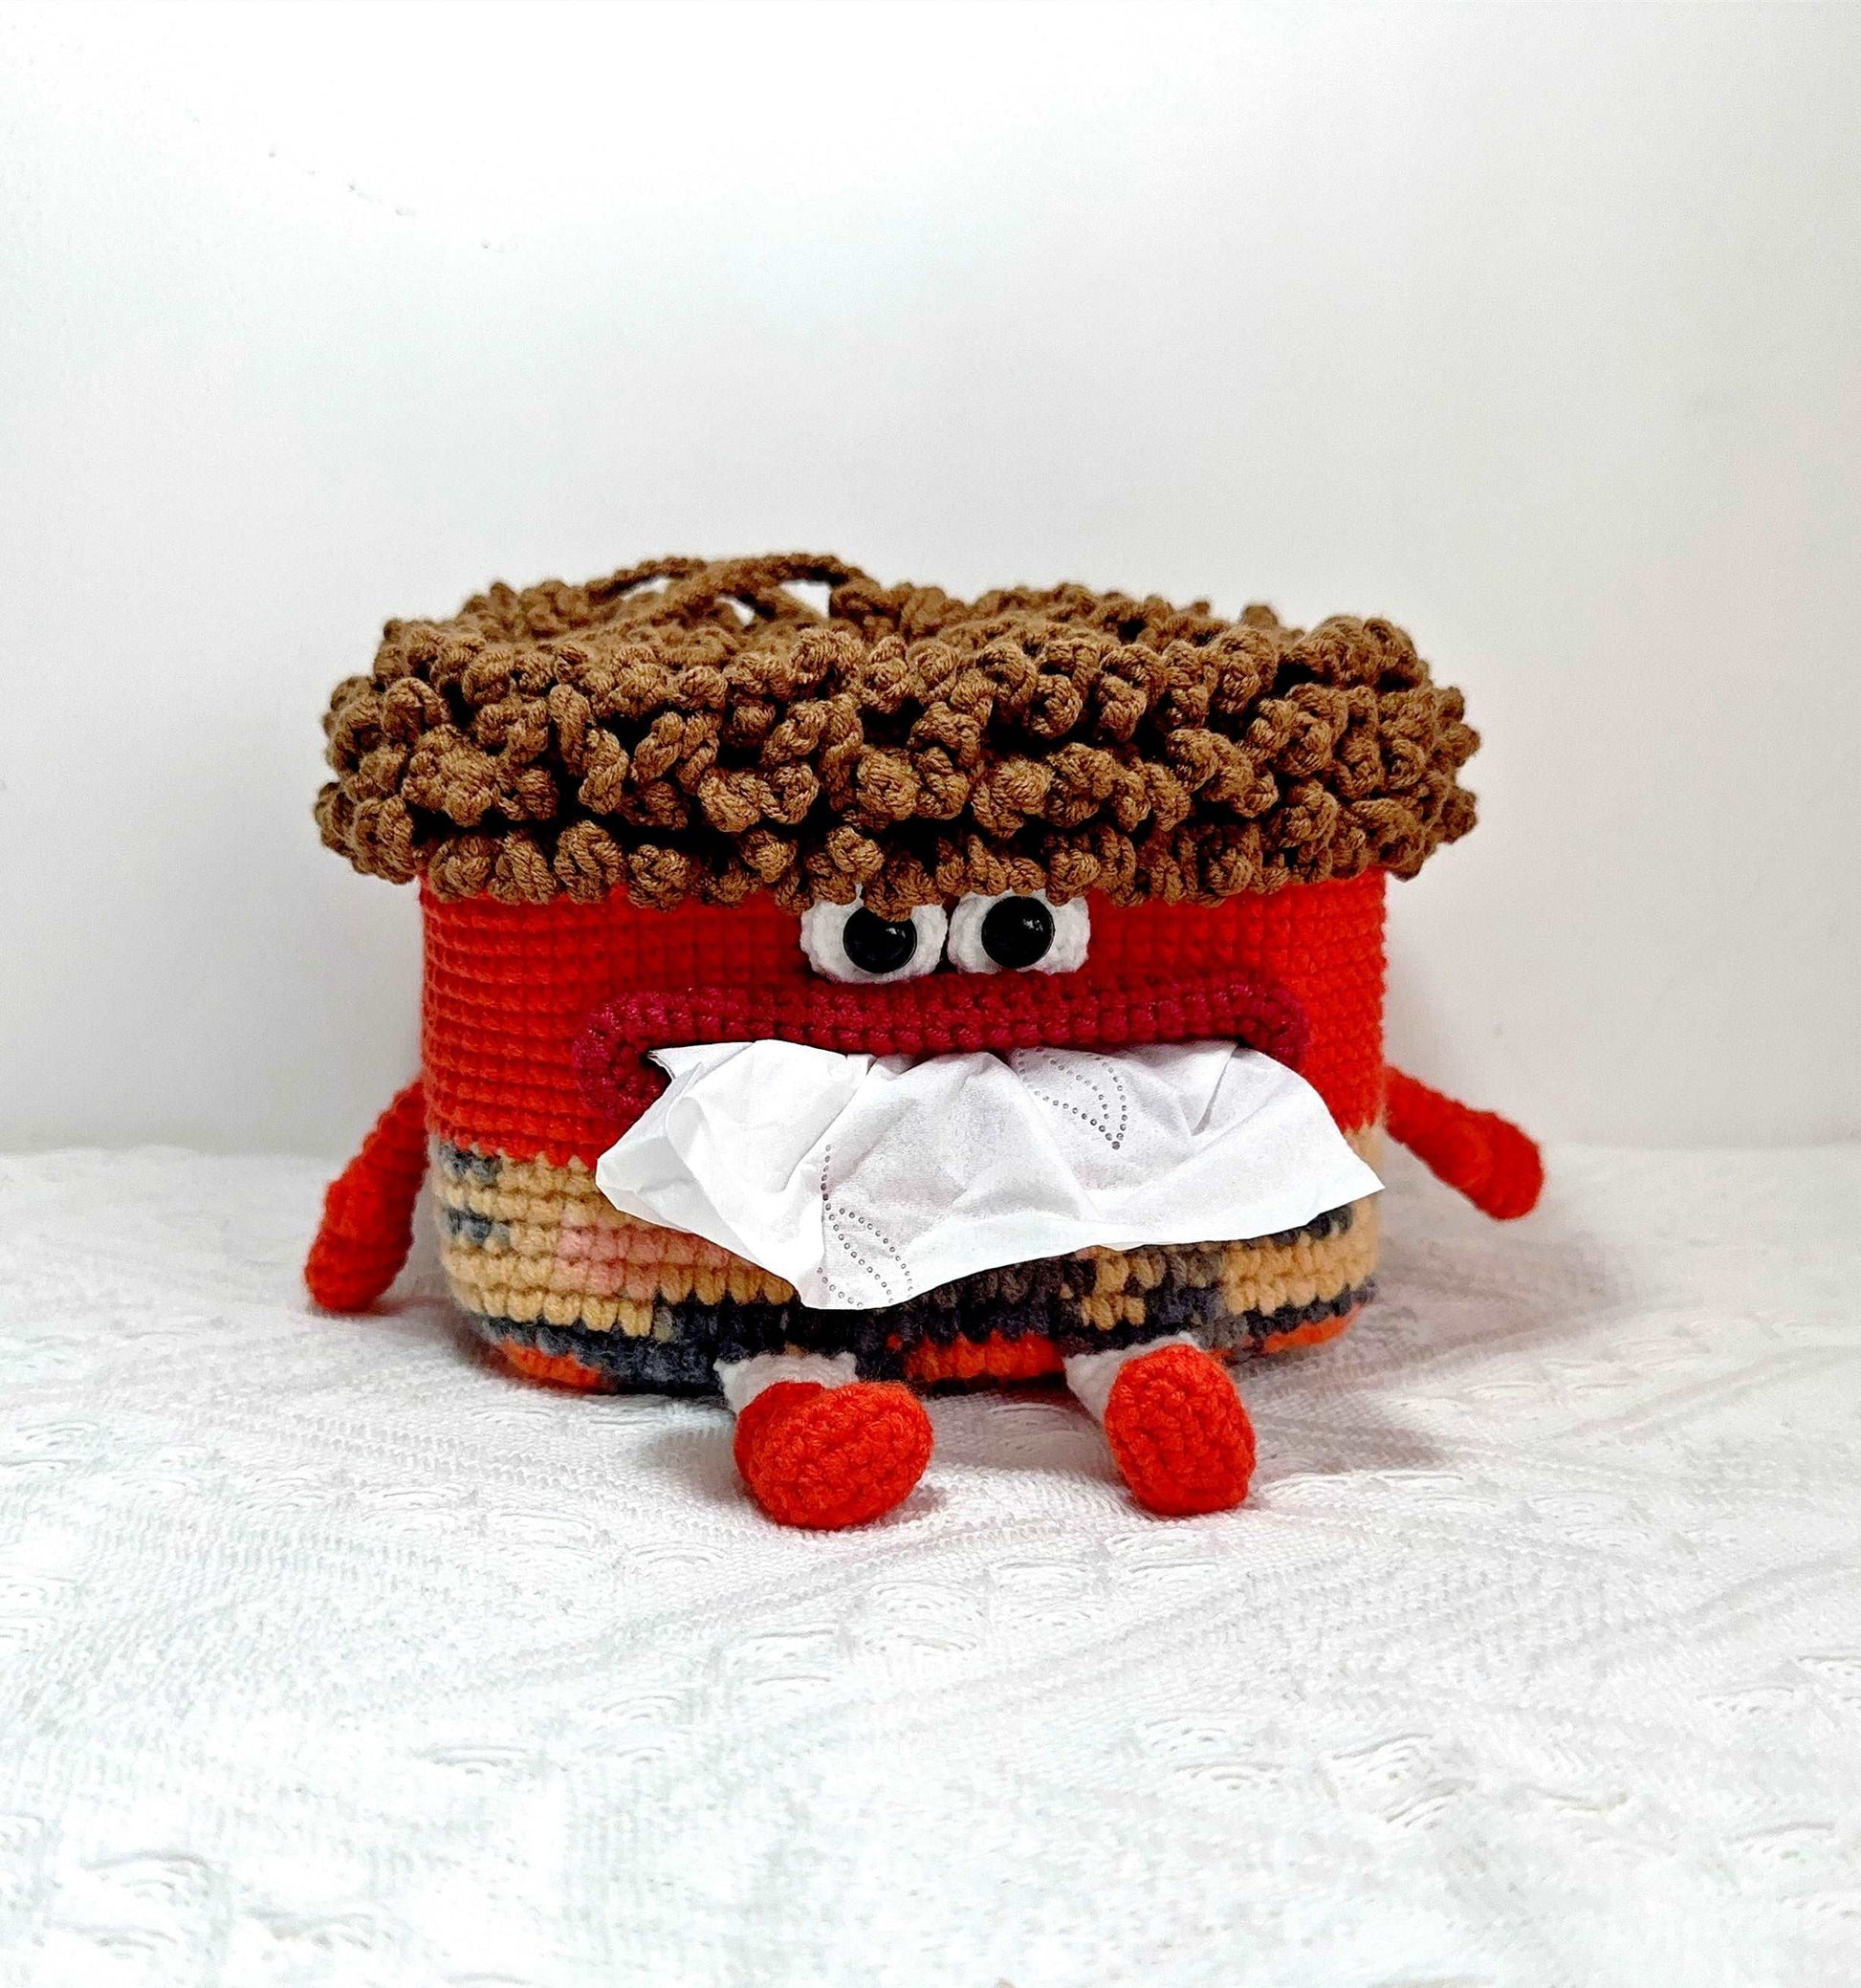 Custom Handmade Knitted Tissue Box Cozy with Mouth Design